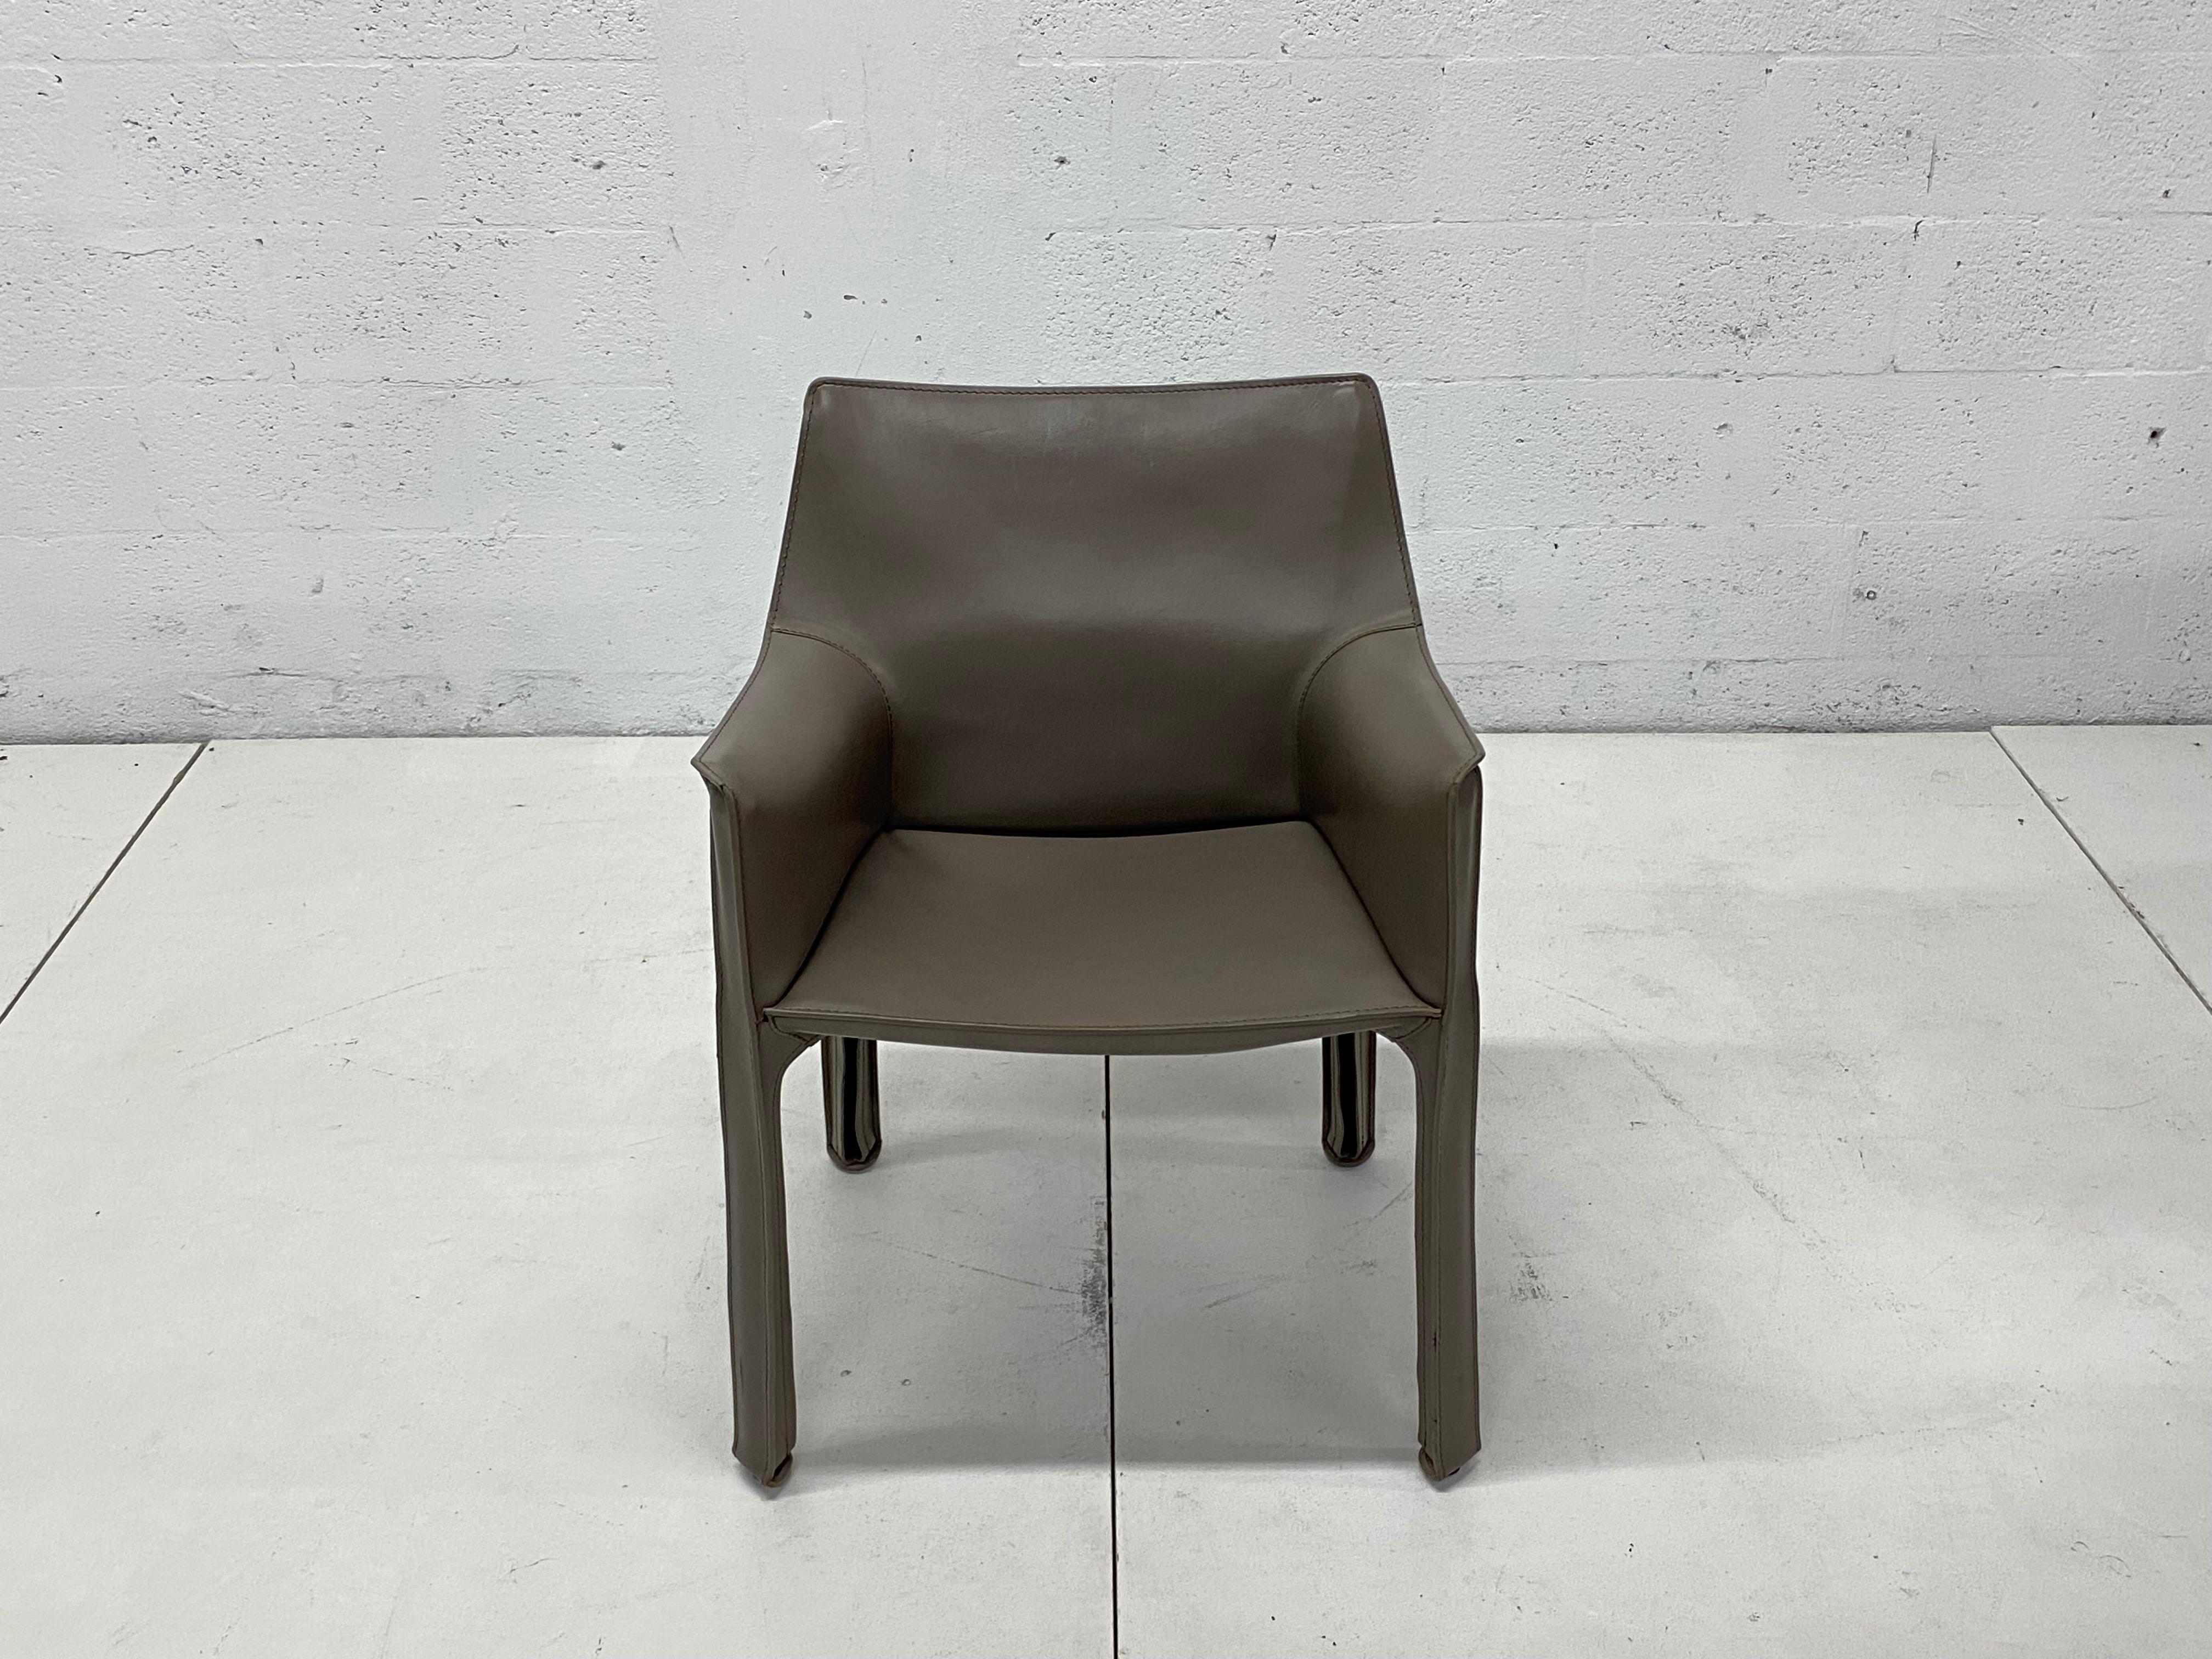 Set of four taupe gray Cab 413 leather dining or side chairs with arm designed by Mario Bellini for Cassina. 

“This was a new kind of chair, constructed totally out of leather, much cloned since then.” Thus Mario Bellini describes Cab, a